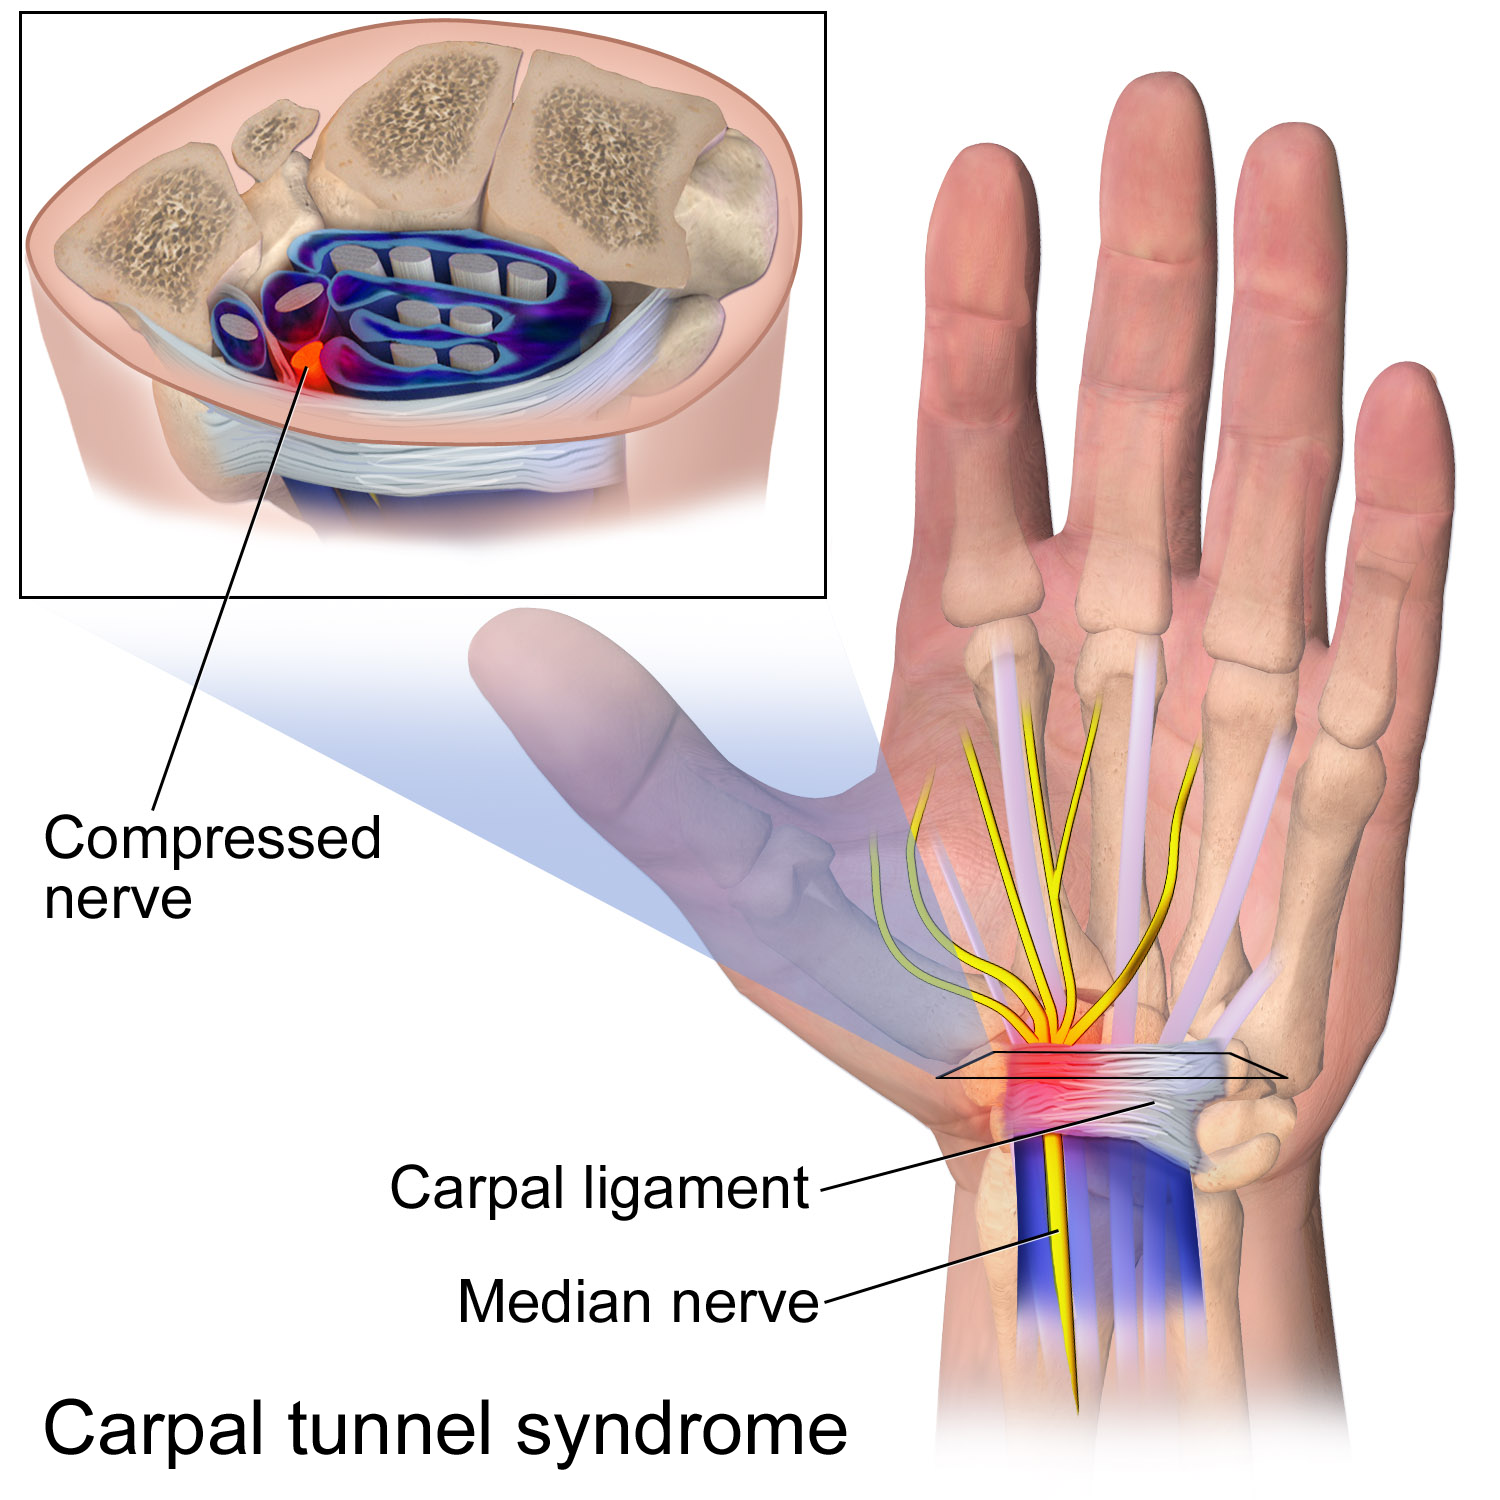 Illustration of carpal tunnel with inflammation shown over the median nerve.